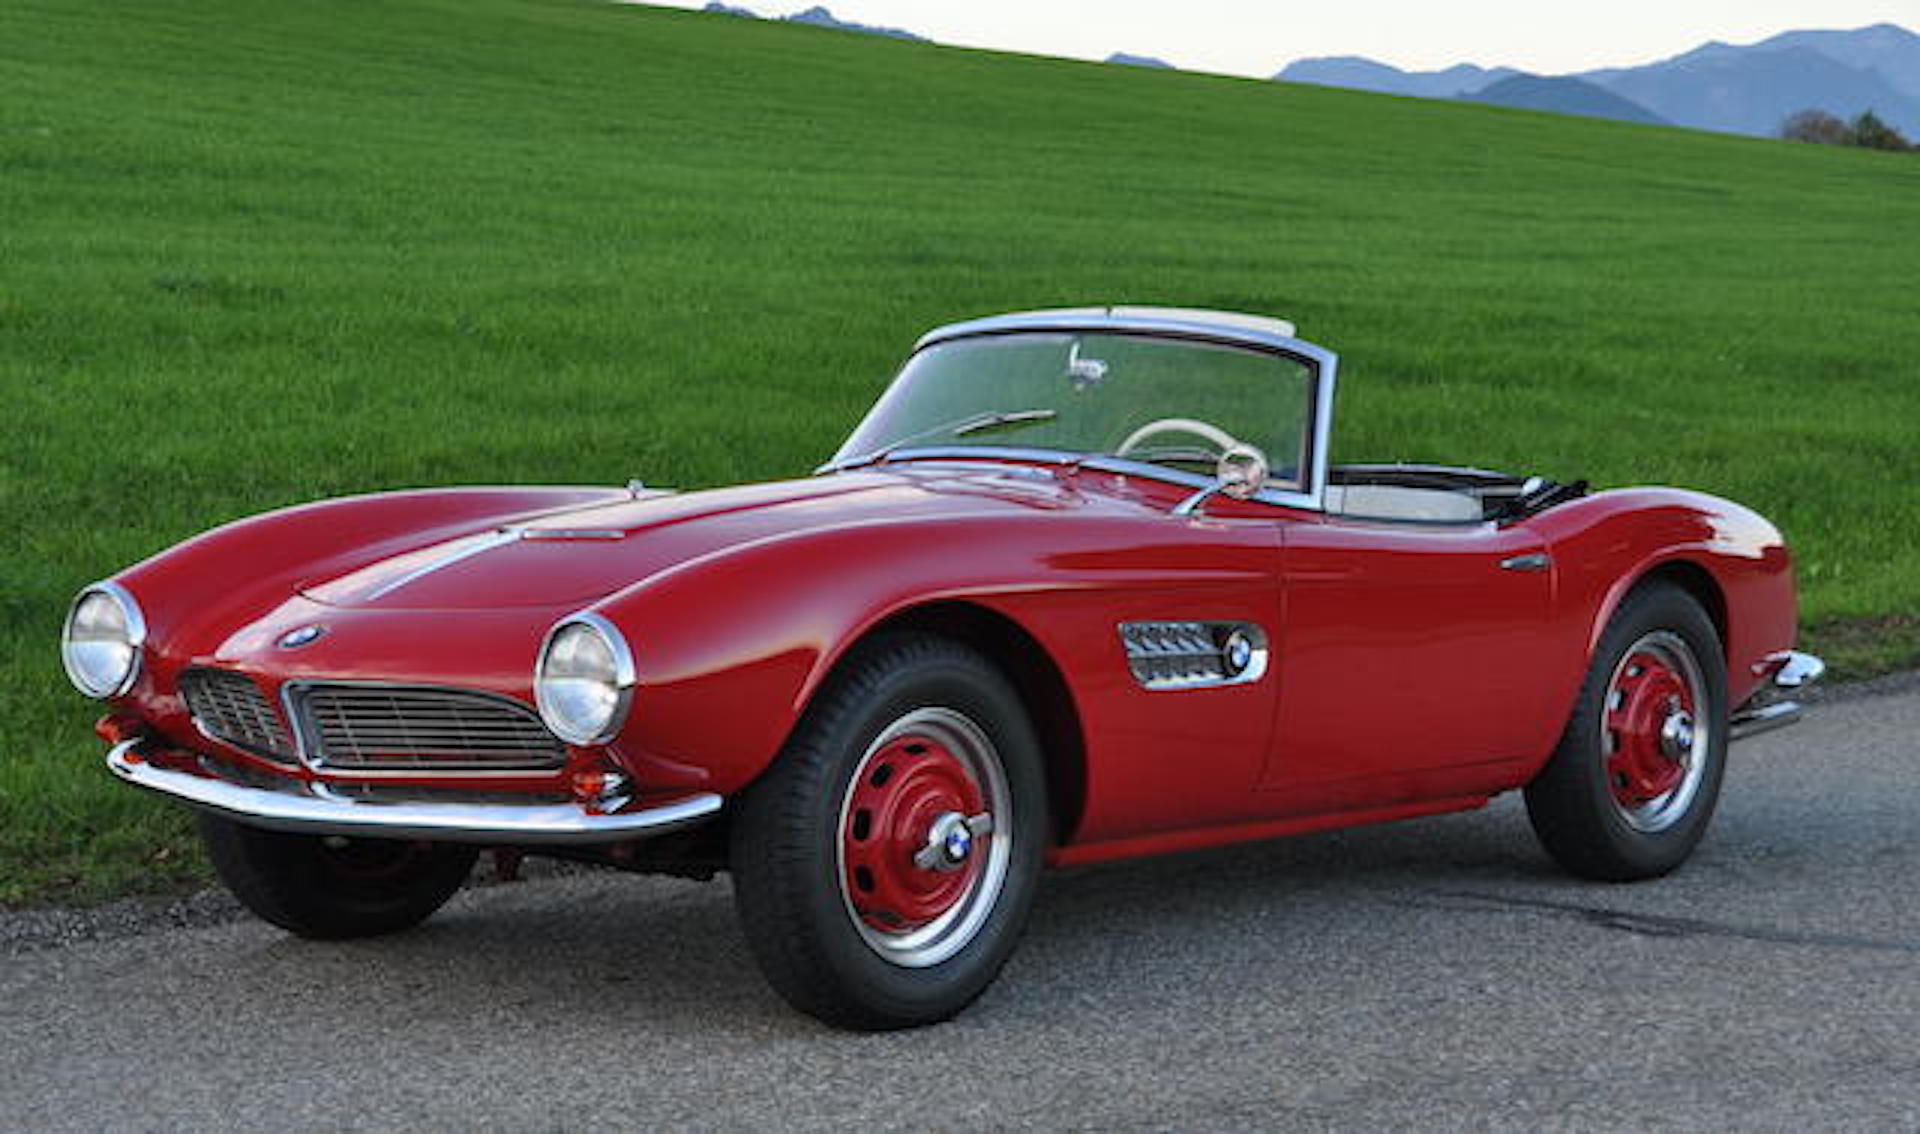 a-bmw-507-owned-by-the-man-who-designed-it-is-headed-to-auction